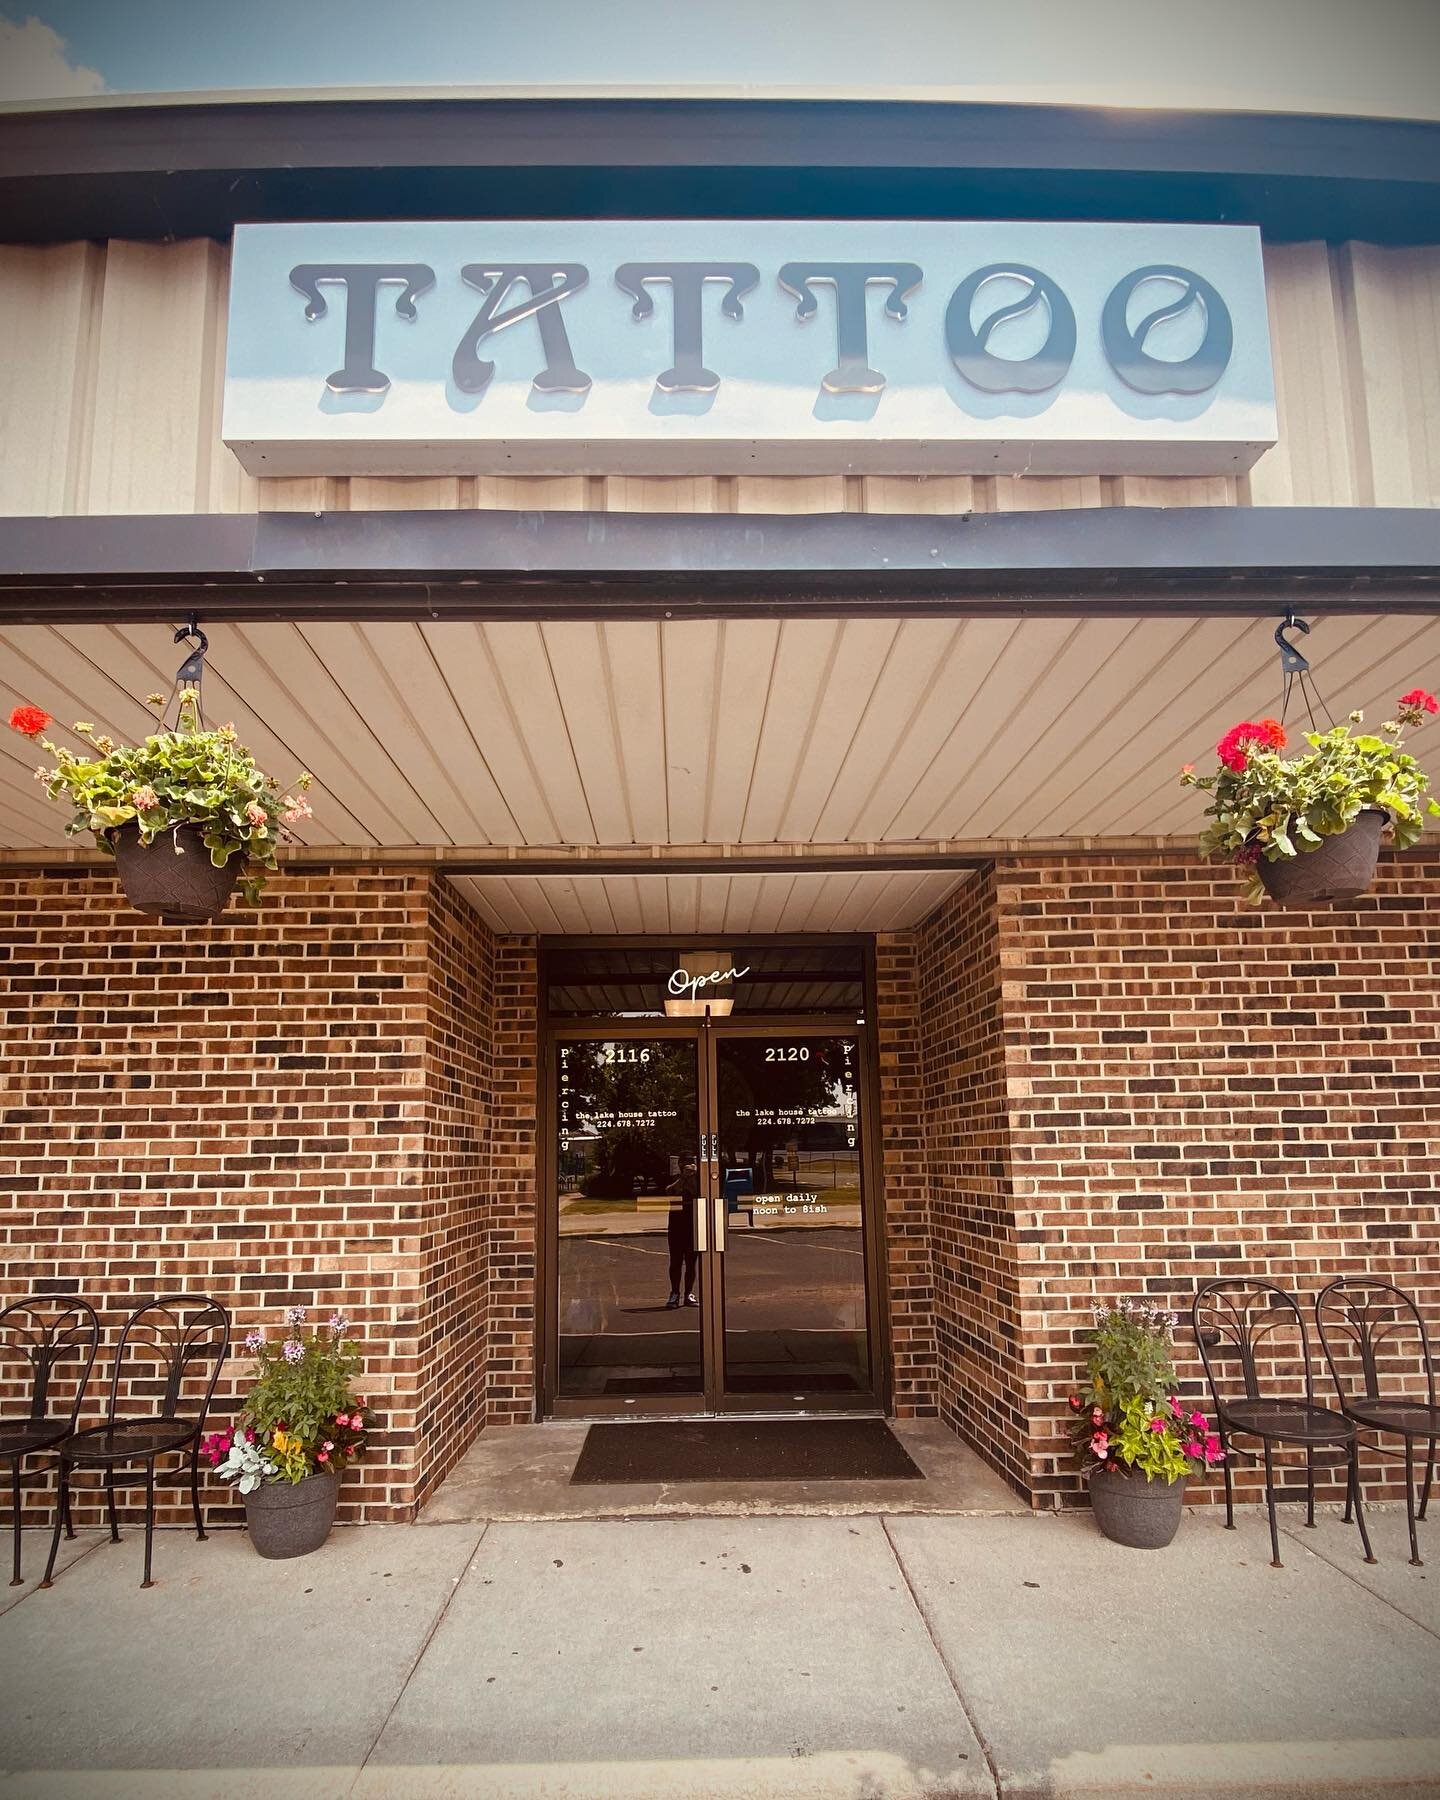 We&rsquo;ve got time to make your tattoo dreams come true. Call or stop by at noon today and tomorrow. FIND US UNDER THE WATER TOWER IN BEAUTIFUL LAKE IN THE HILLS #walkinswelcome #lithlife #lakeinthehills #tattootime #thelakehousetattoo